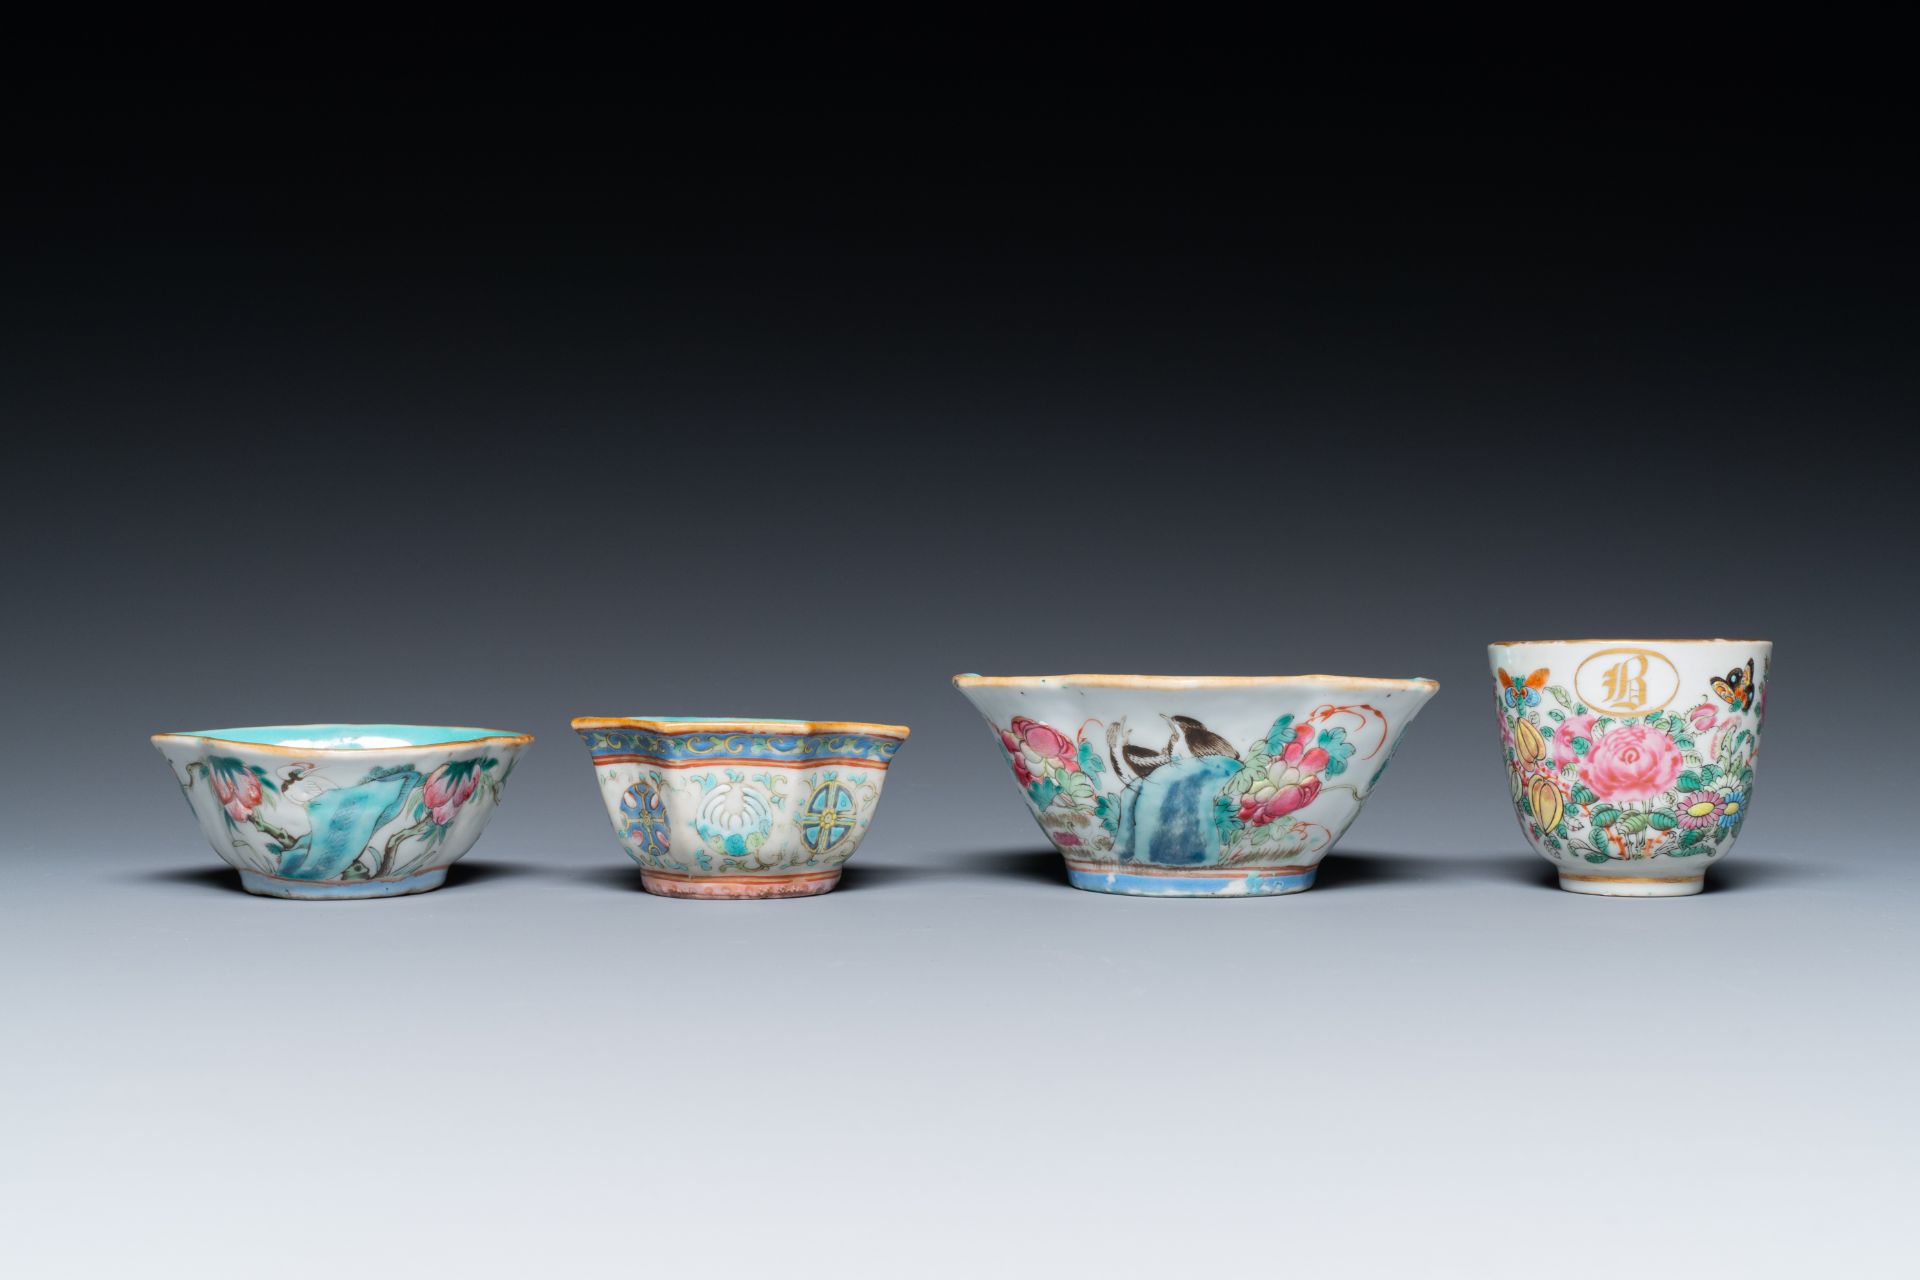 A varied collection of Chinese porcelain, 18/19th C. - Image 8 of 11